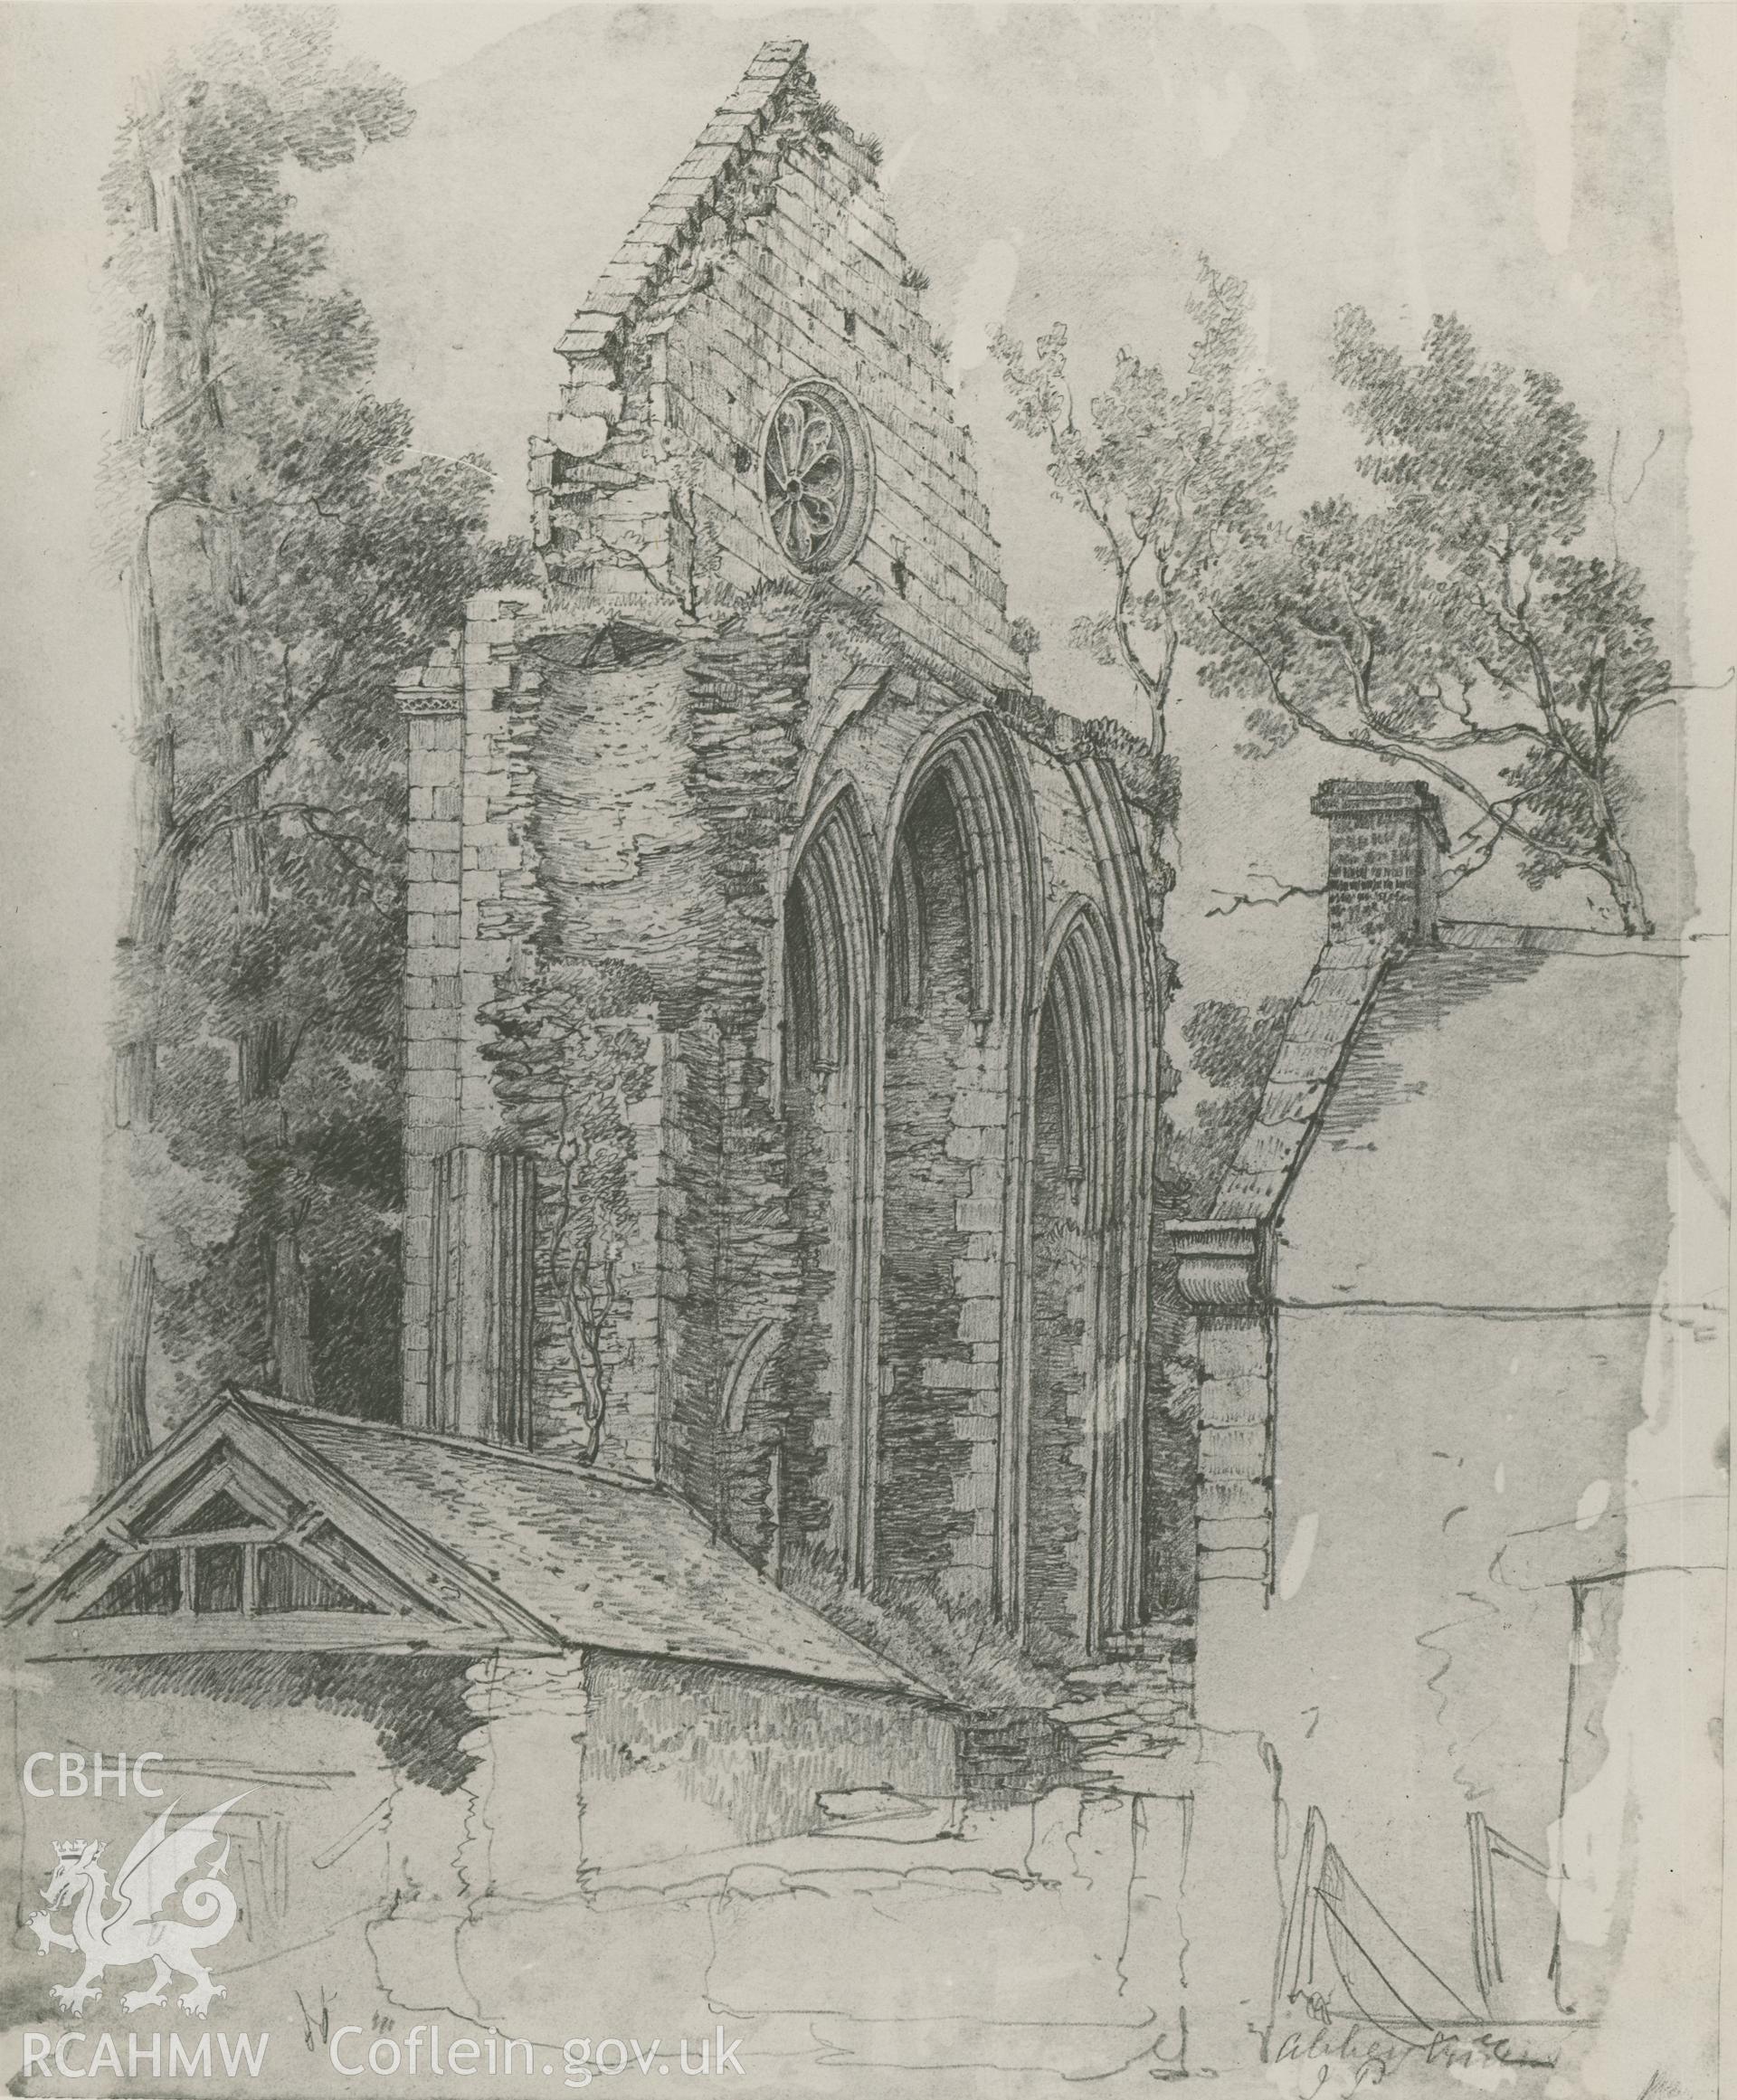 Photographic print by Macbeth of a pencil sketch showing gable at Valle Crucis Abbey.